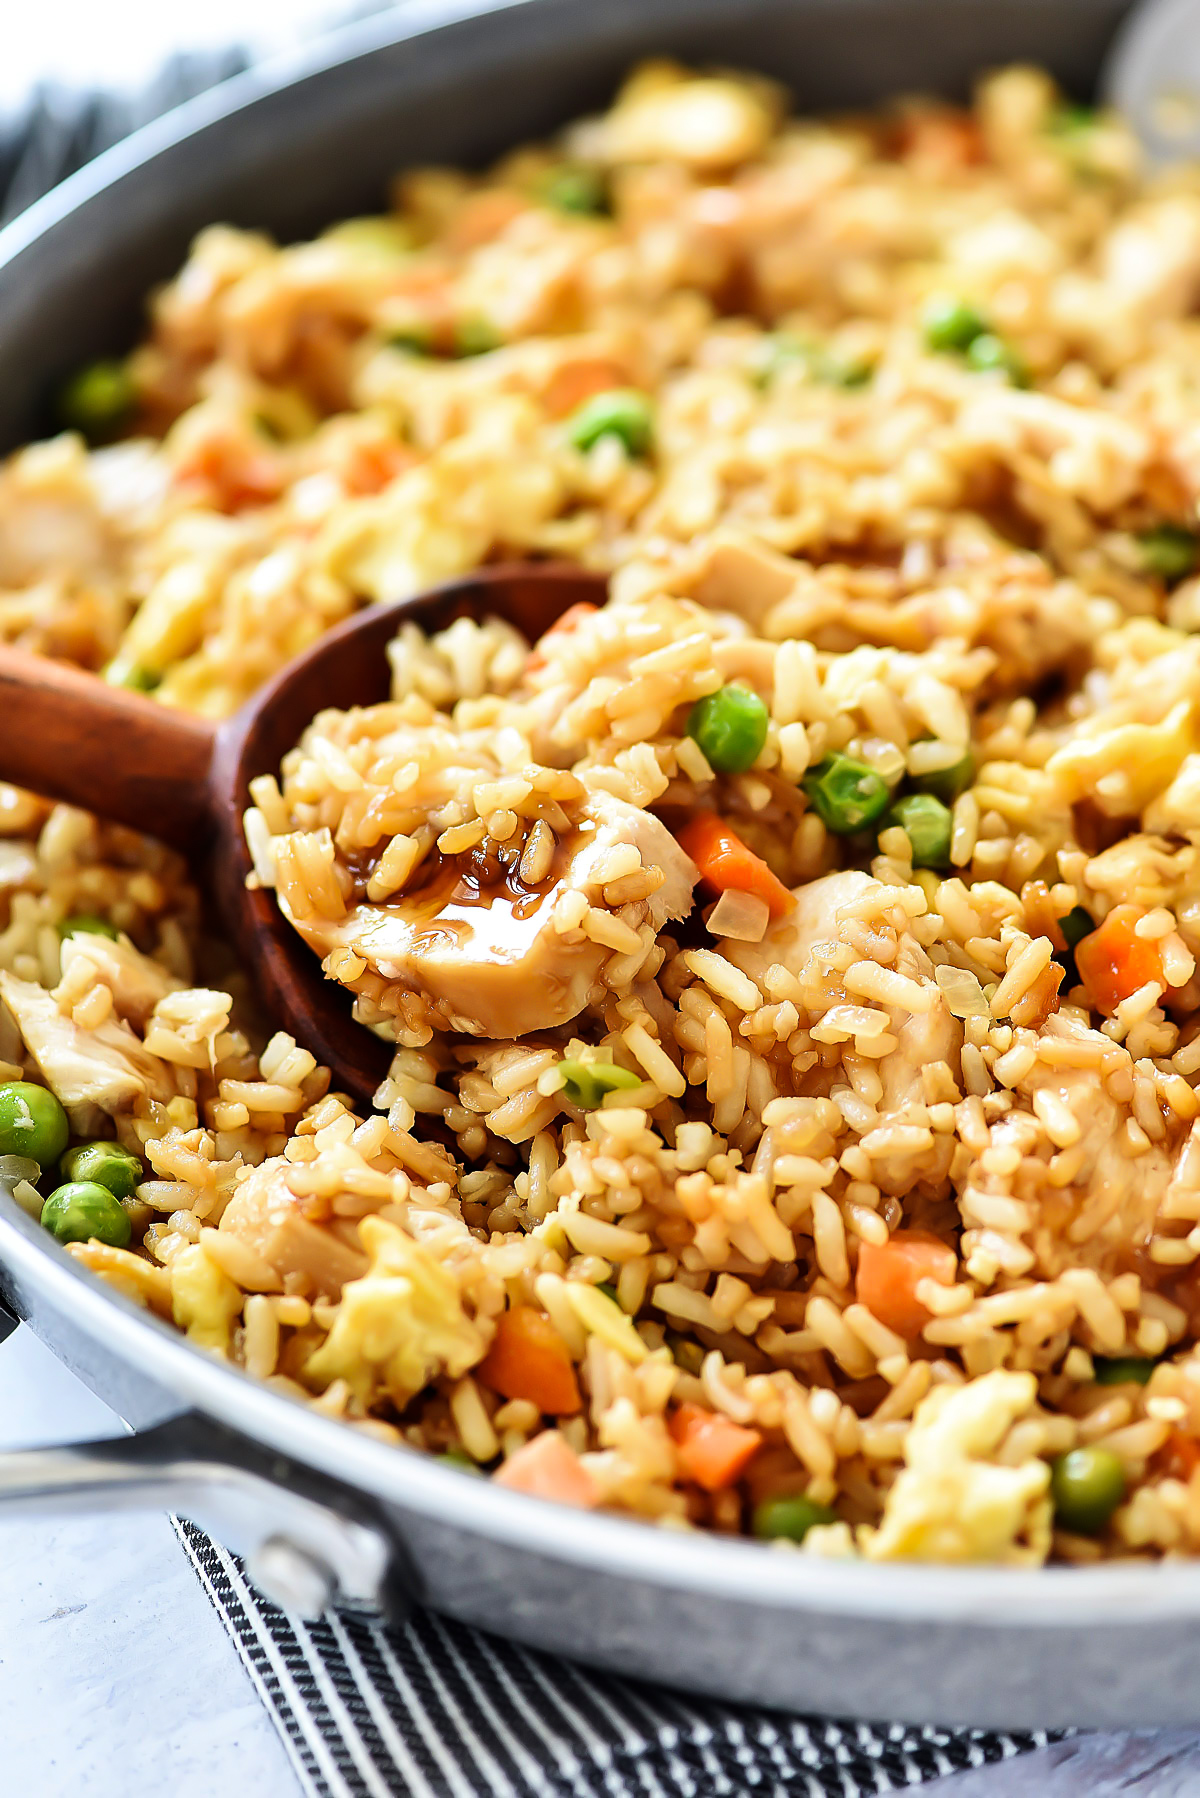 Chicken fried rice has all the classic elements of fried rice with teriyaki chicken through out. Life-in-the-Lofthouse.com